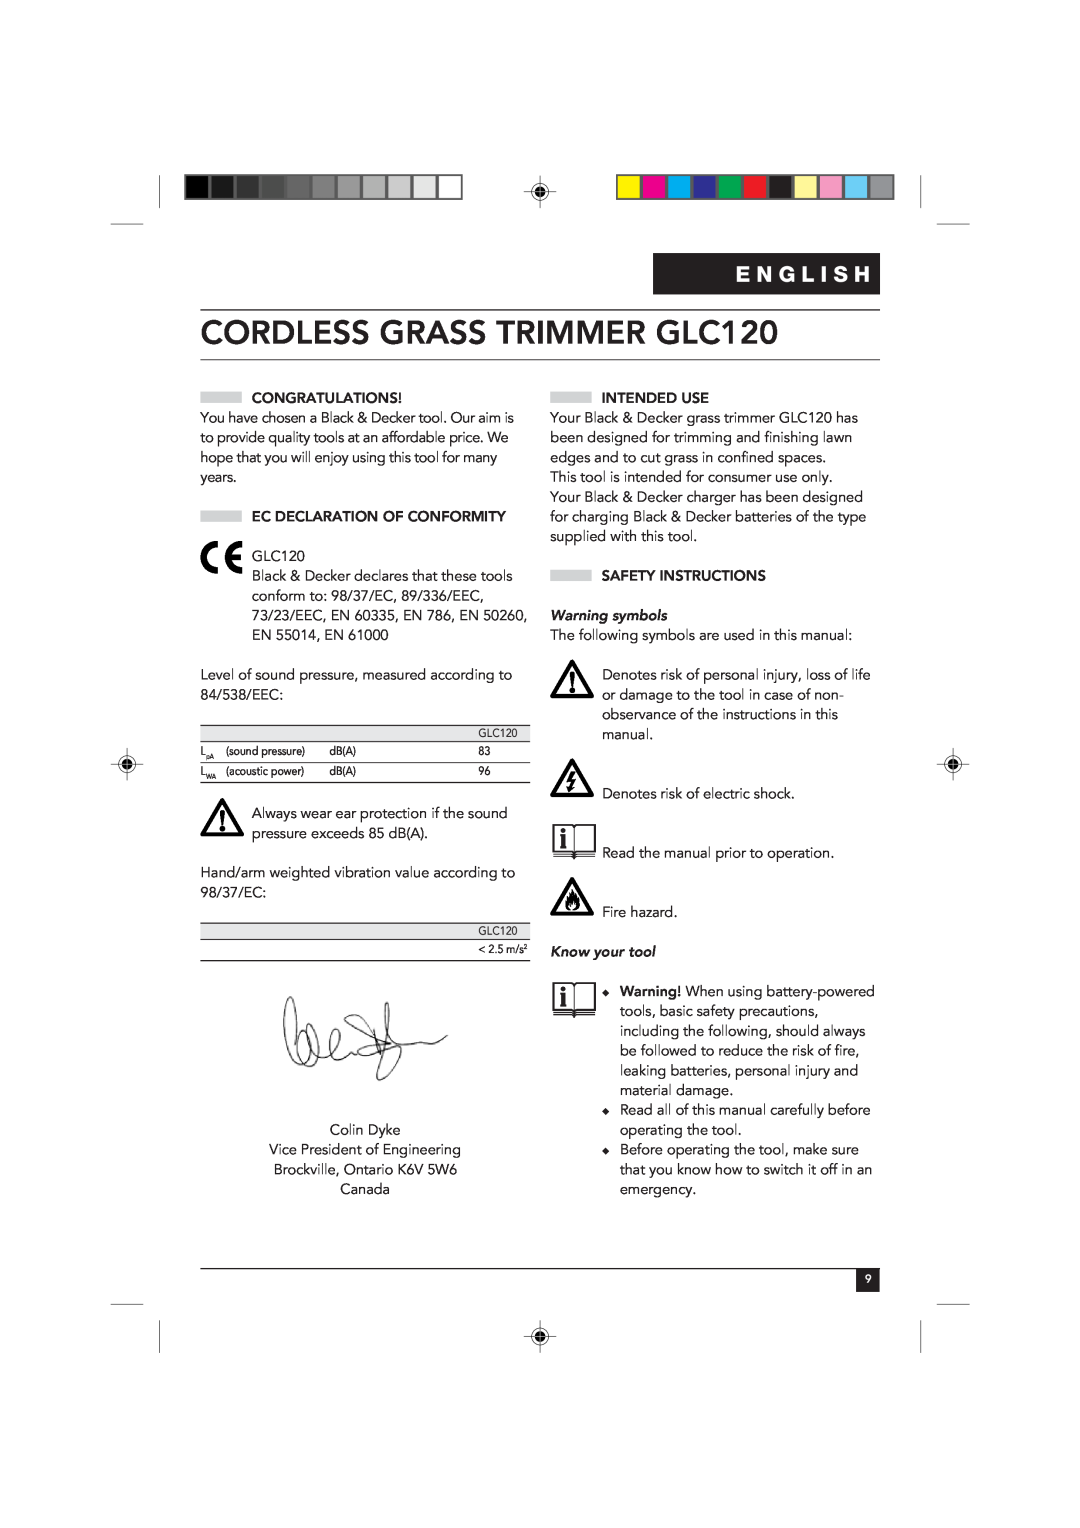 Black & Decker manual E N G L I S H, Warning symbols, Know your tool, CORDLESS GRASS TRIMMER GLC120 